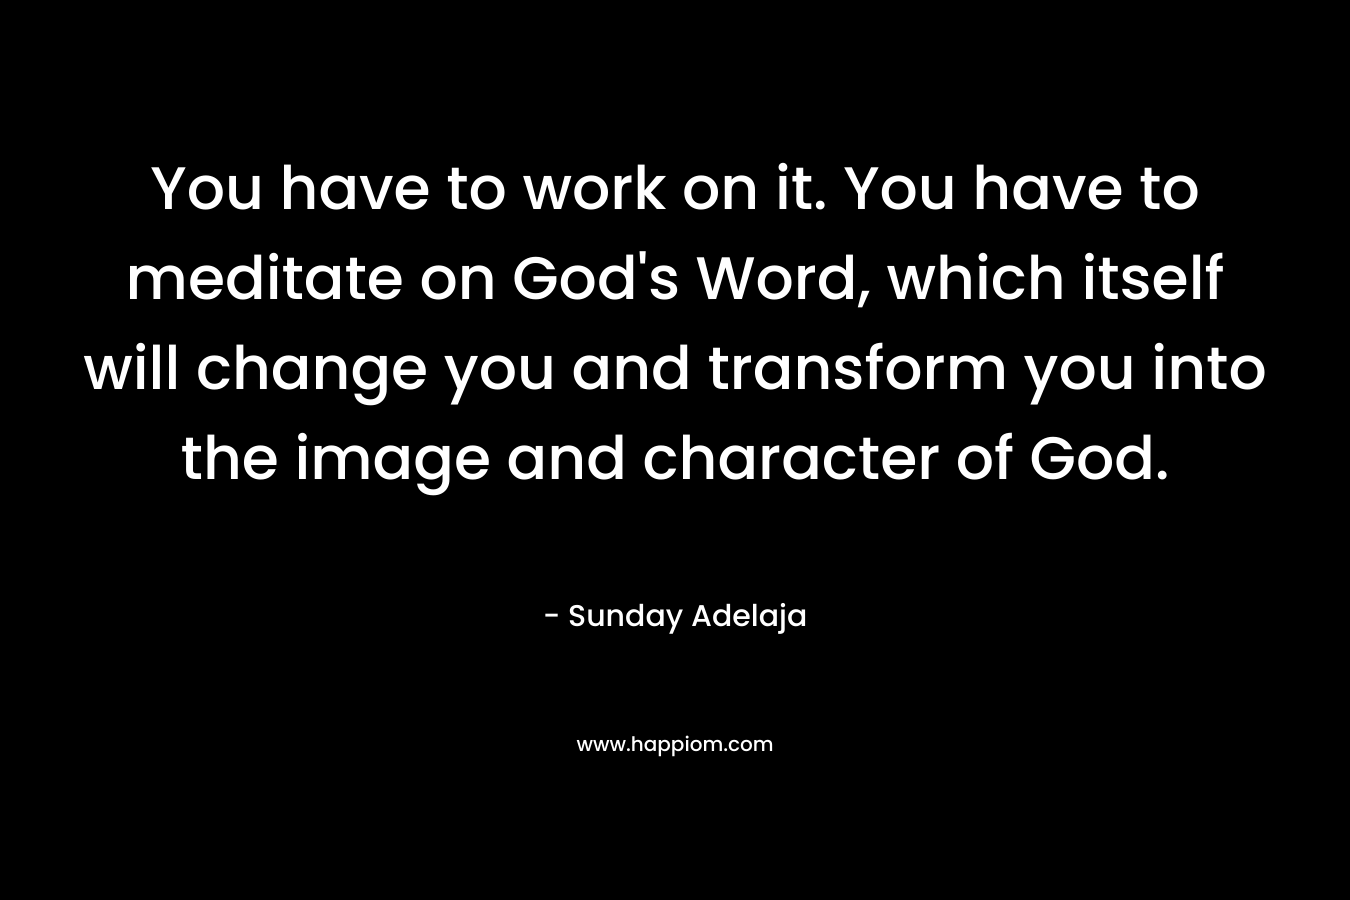 You have to work on it. You have to meditate on God's Word, which itself will change you and transform you into the image and character of God.